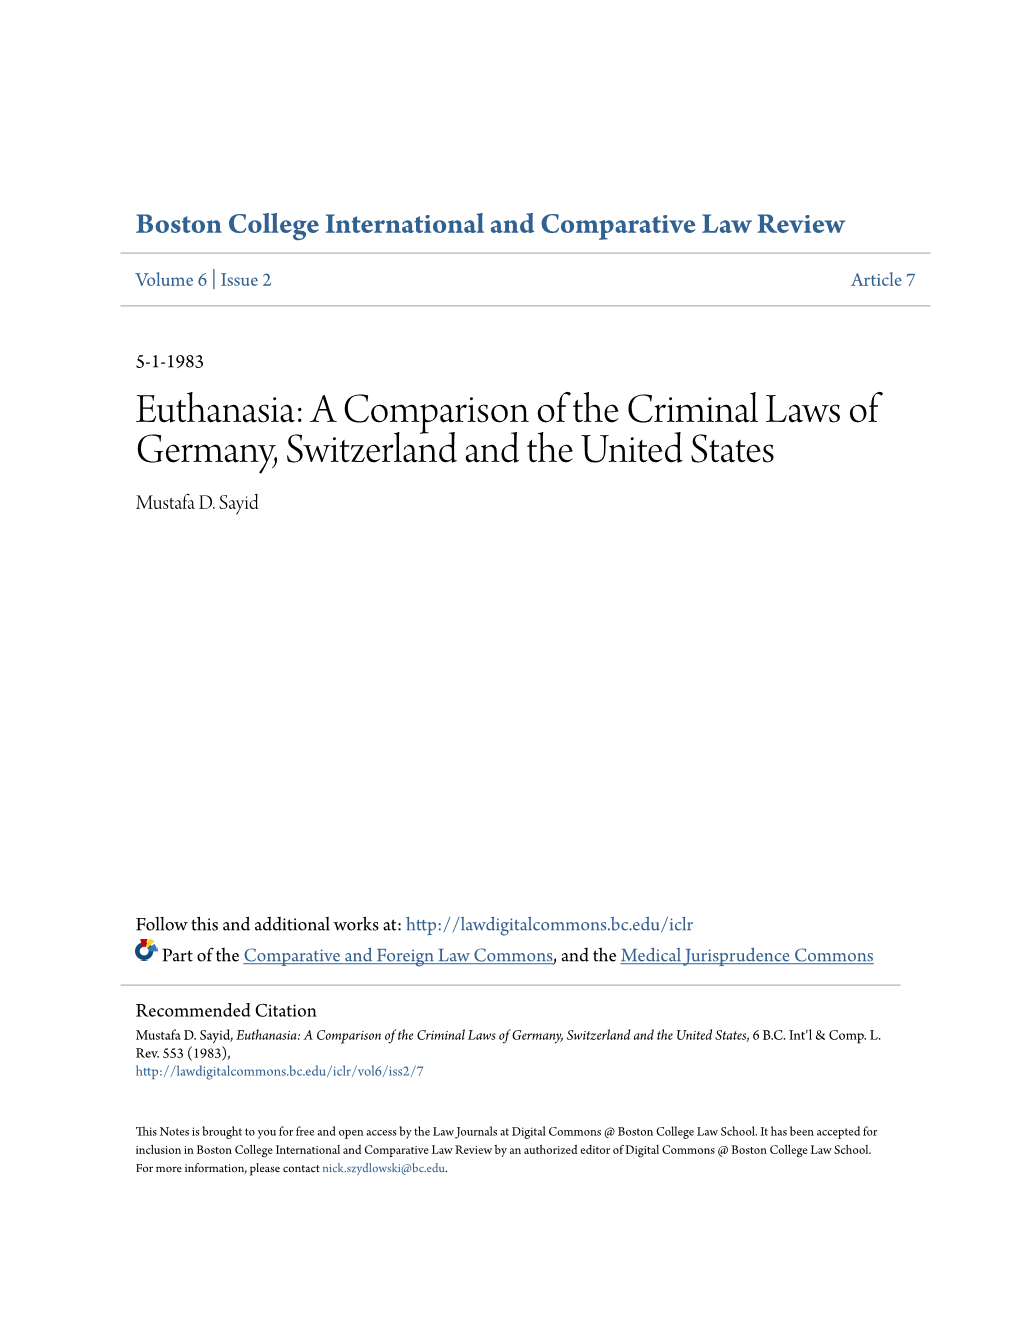 Euthanasia: a Comparison of the Criminal Laws of Germany, Switzerland and the United States Mustafa D